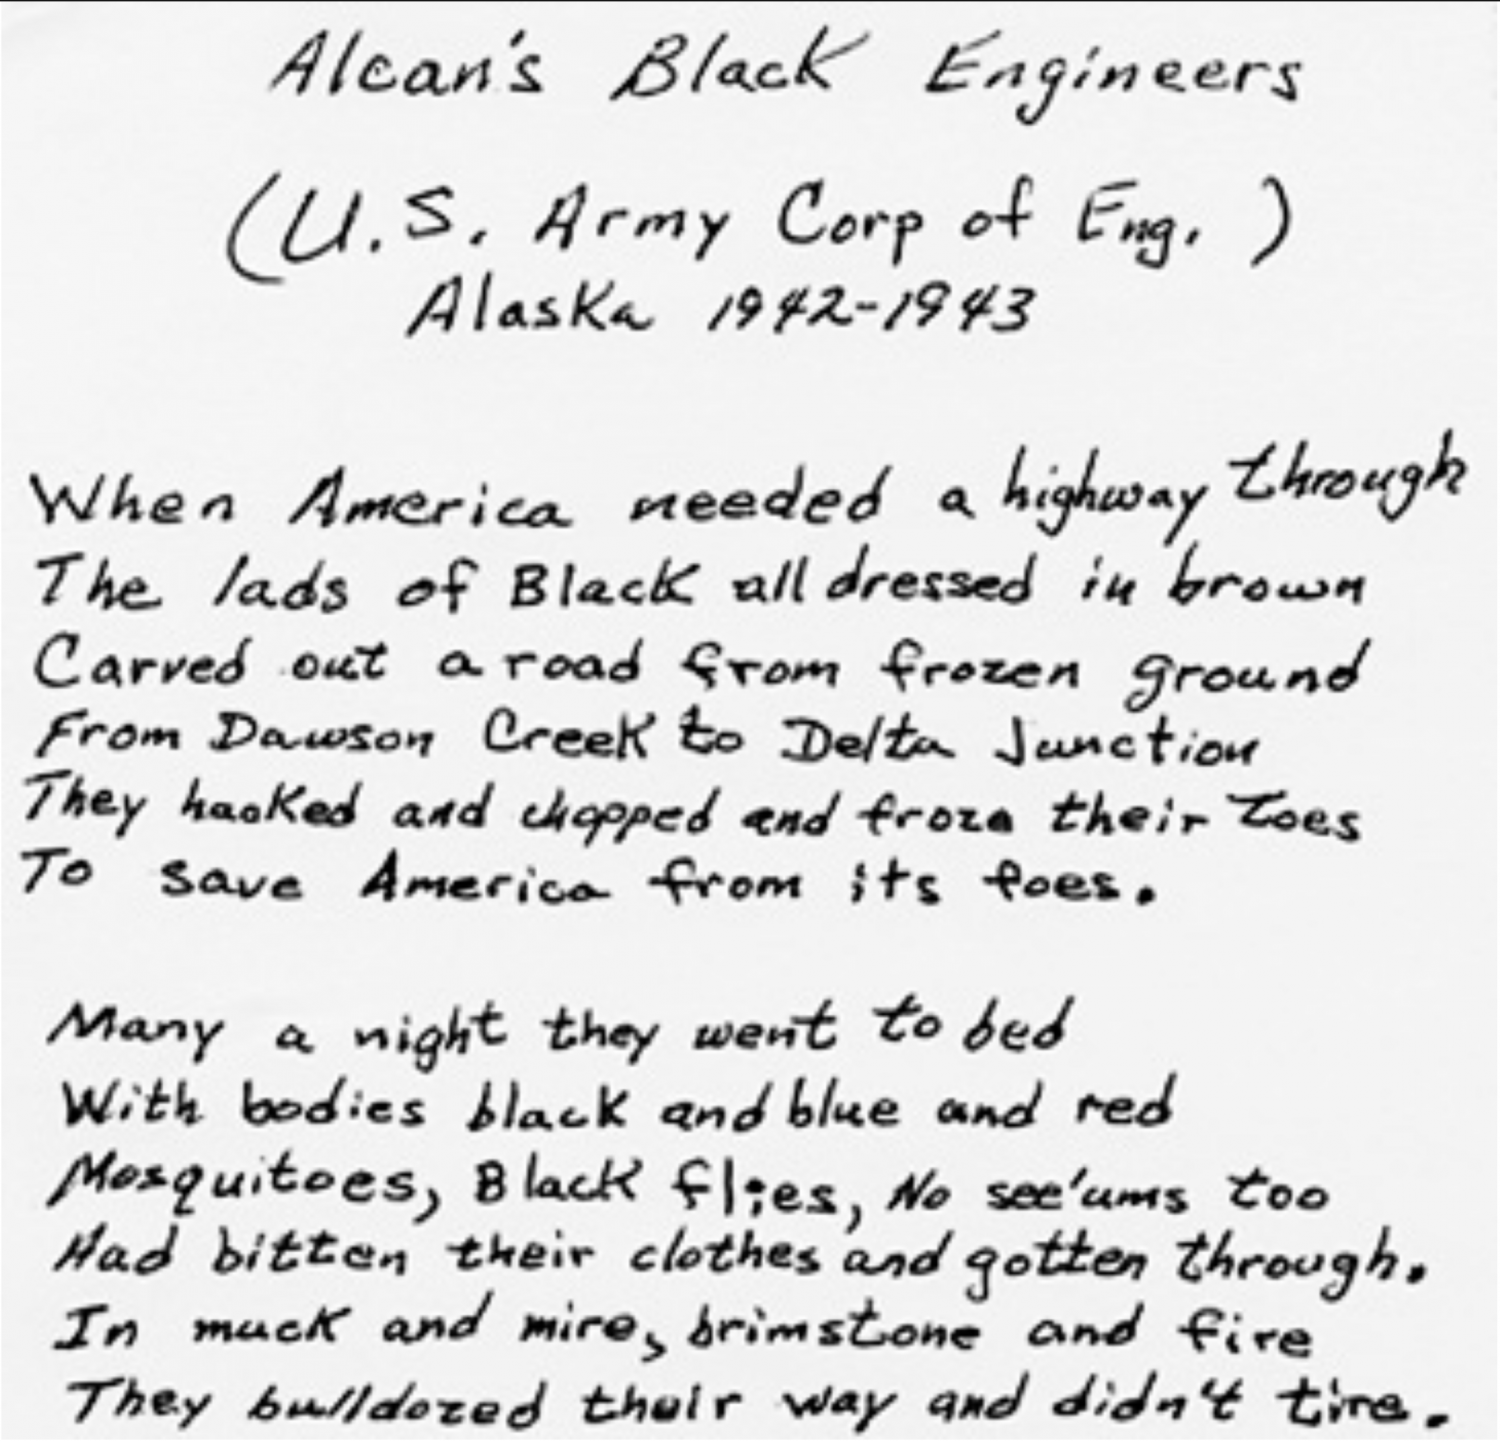 Poem written about Black soldiers’ contribution to construction of the Alaskan Highway.